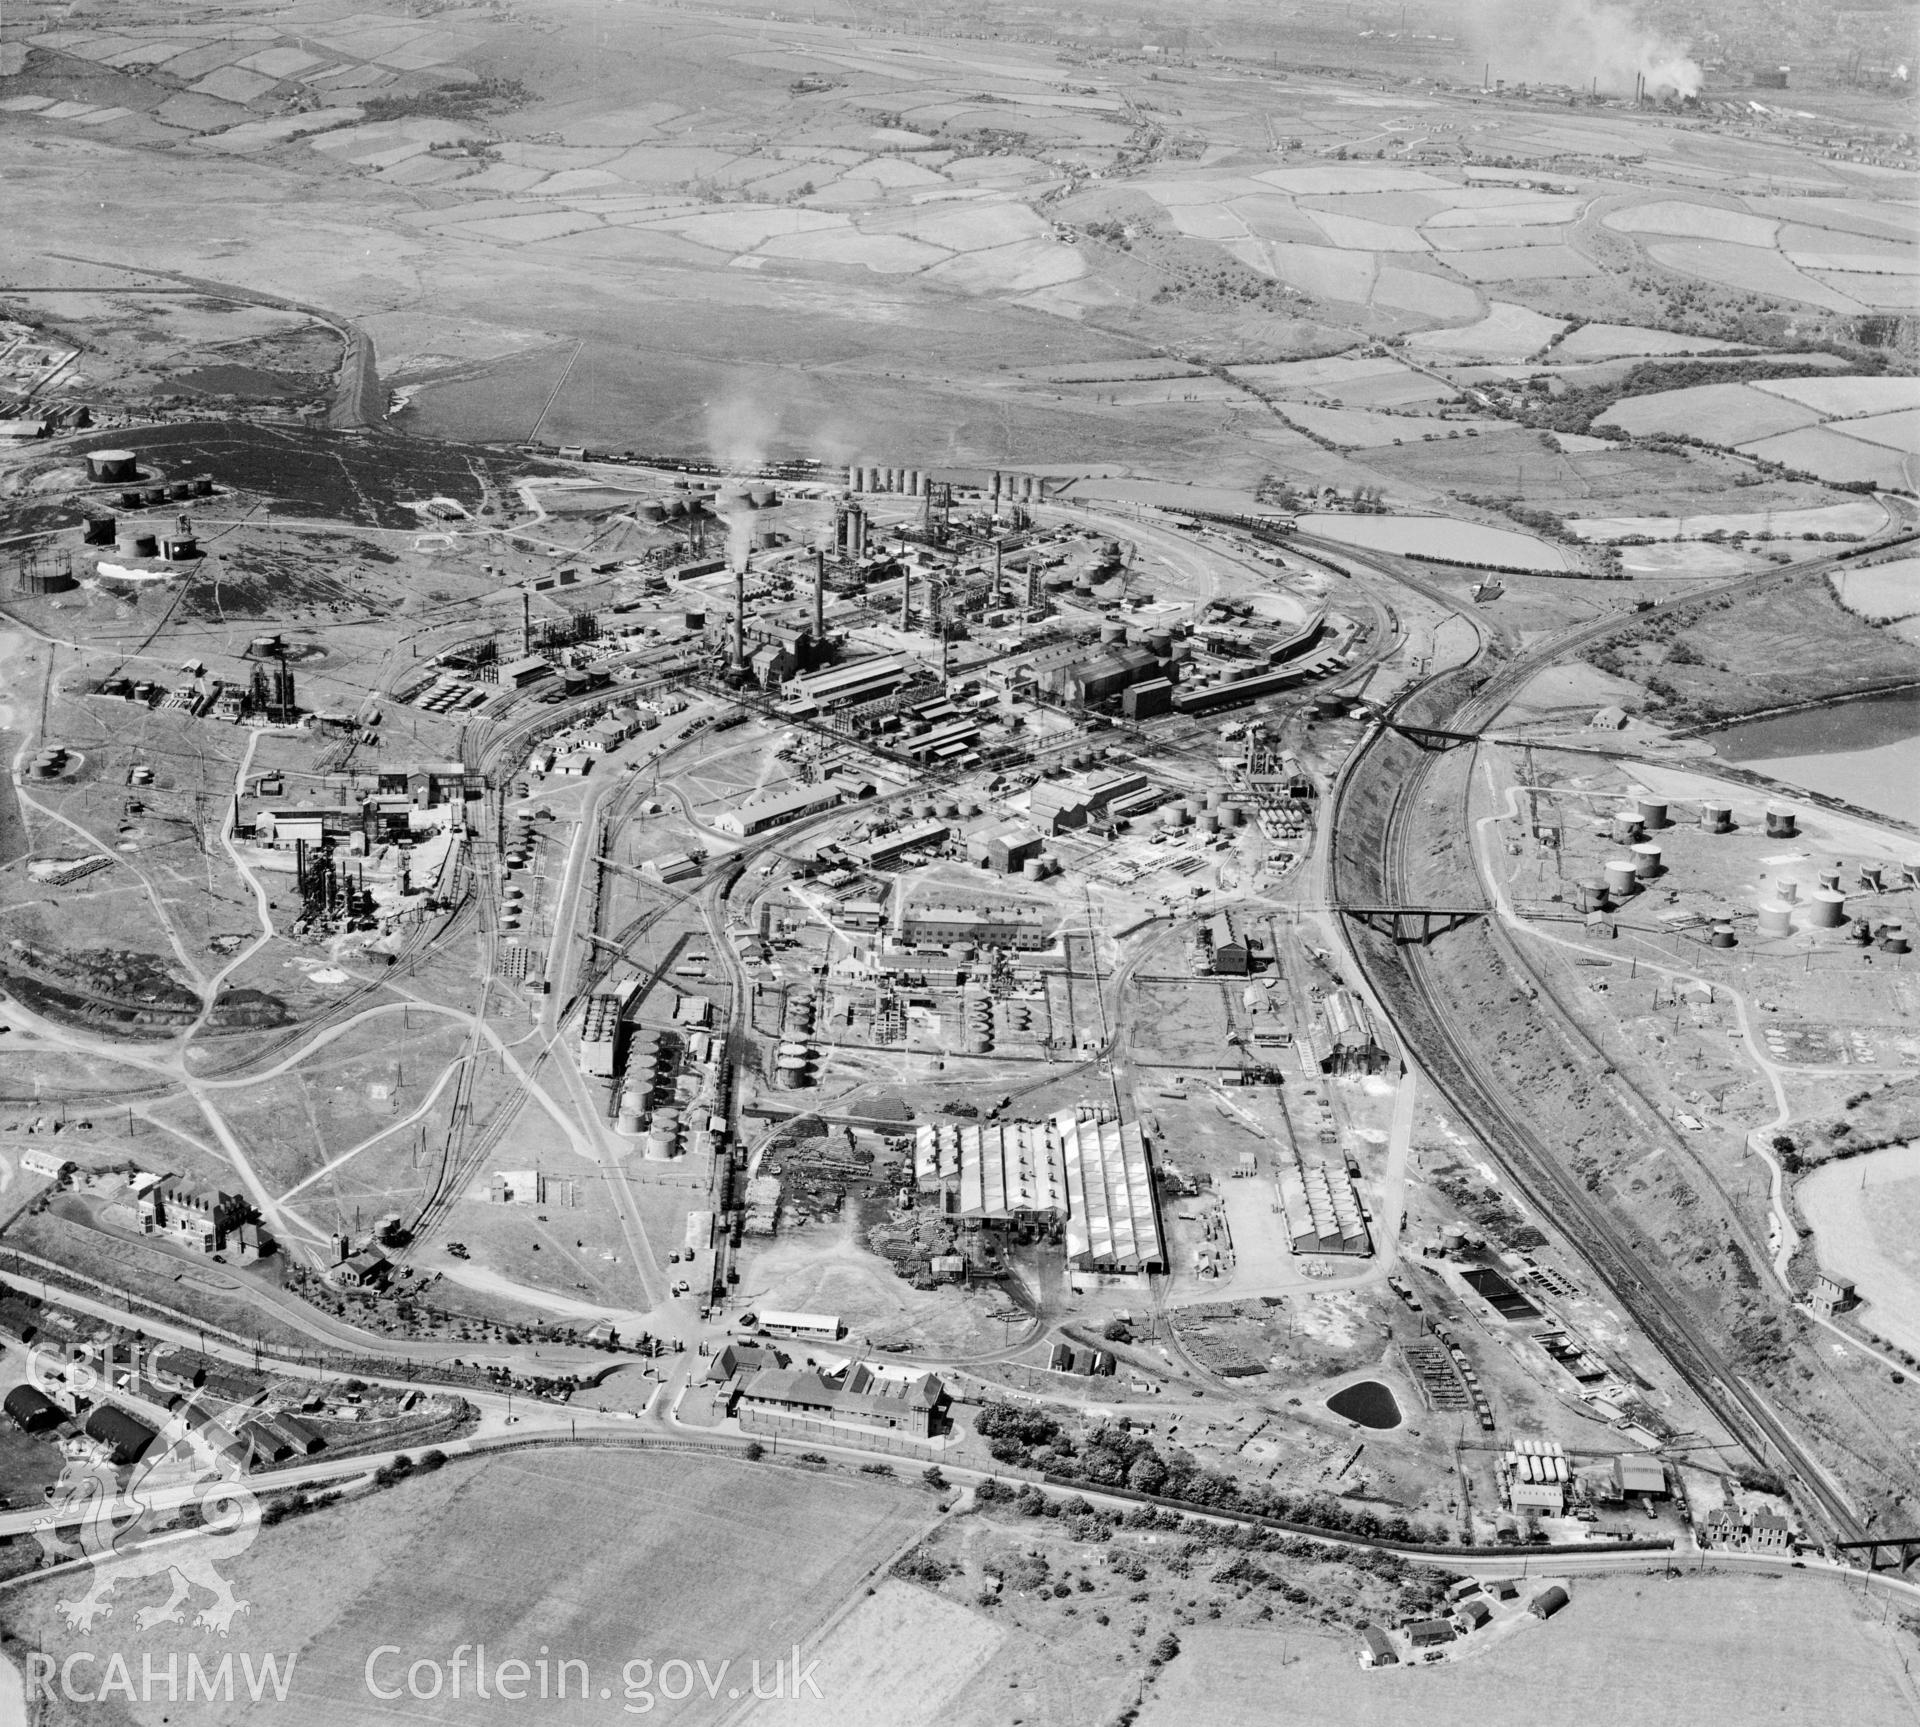 View of Anglo Iranian Oil Co., Llandarcy. Oblique aerial photograph, 5?" cut roll film.